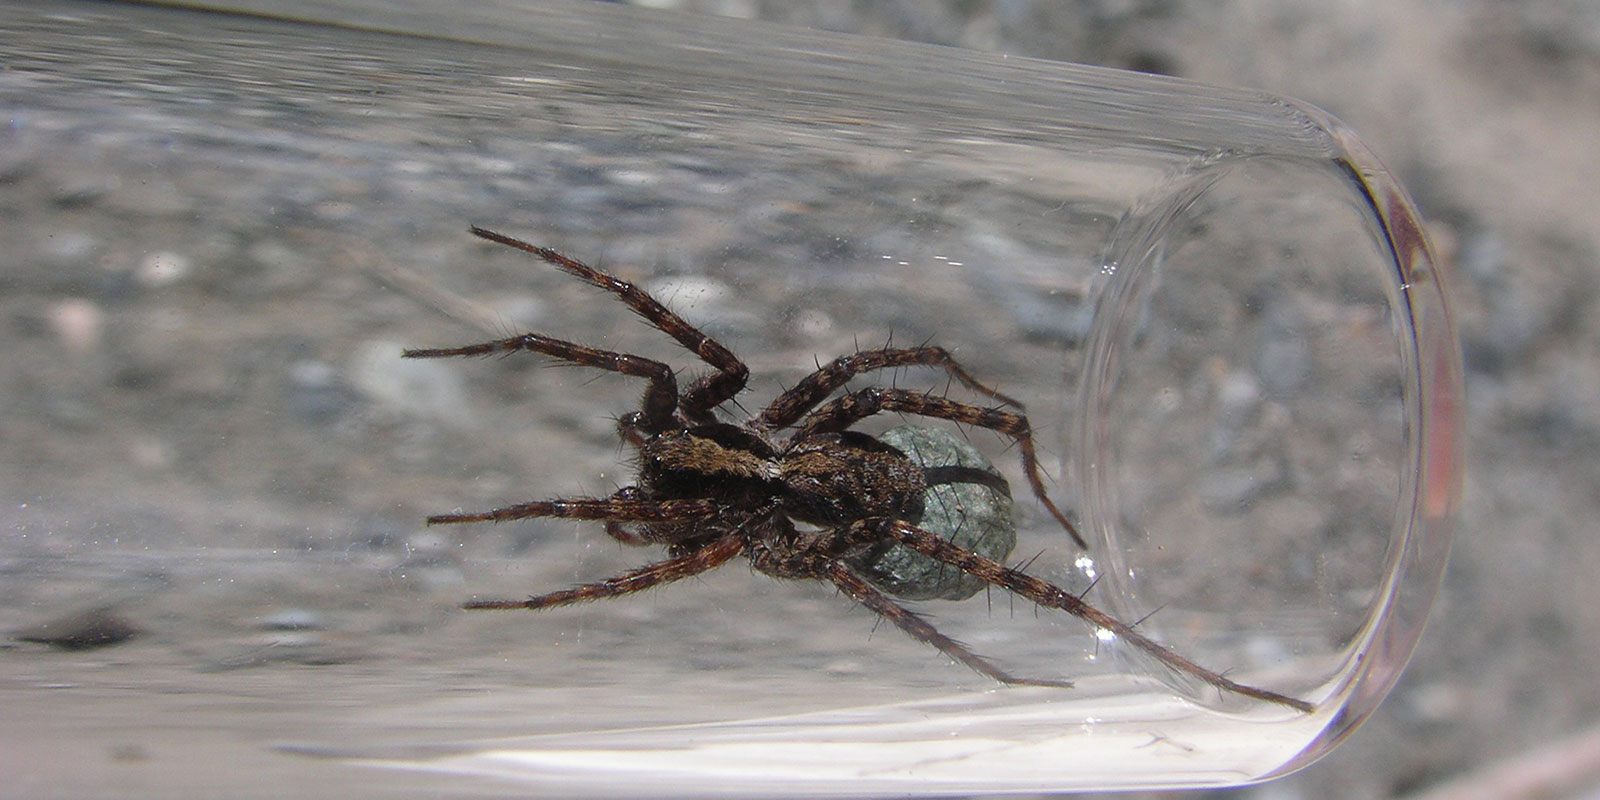 A large wolf spider in a clear glass container